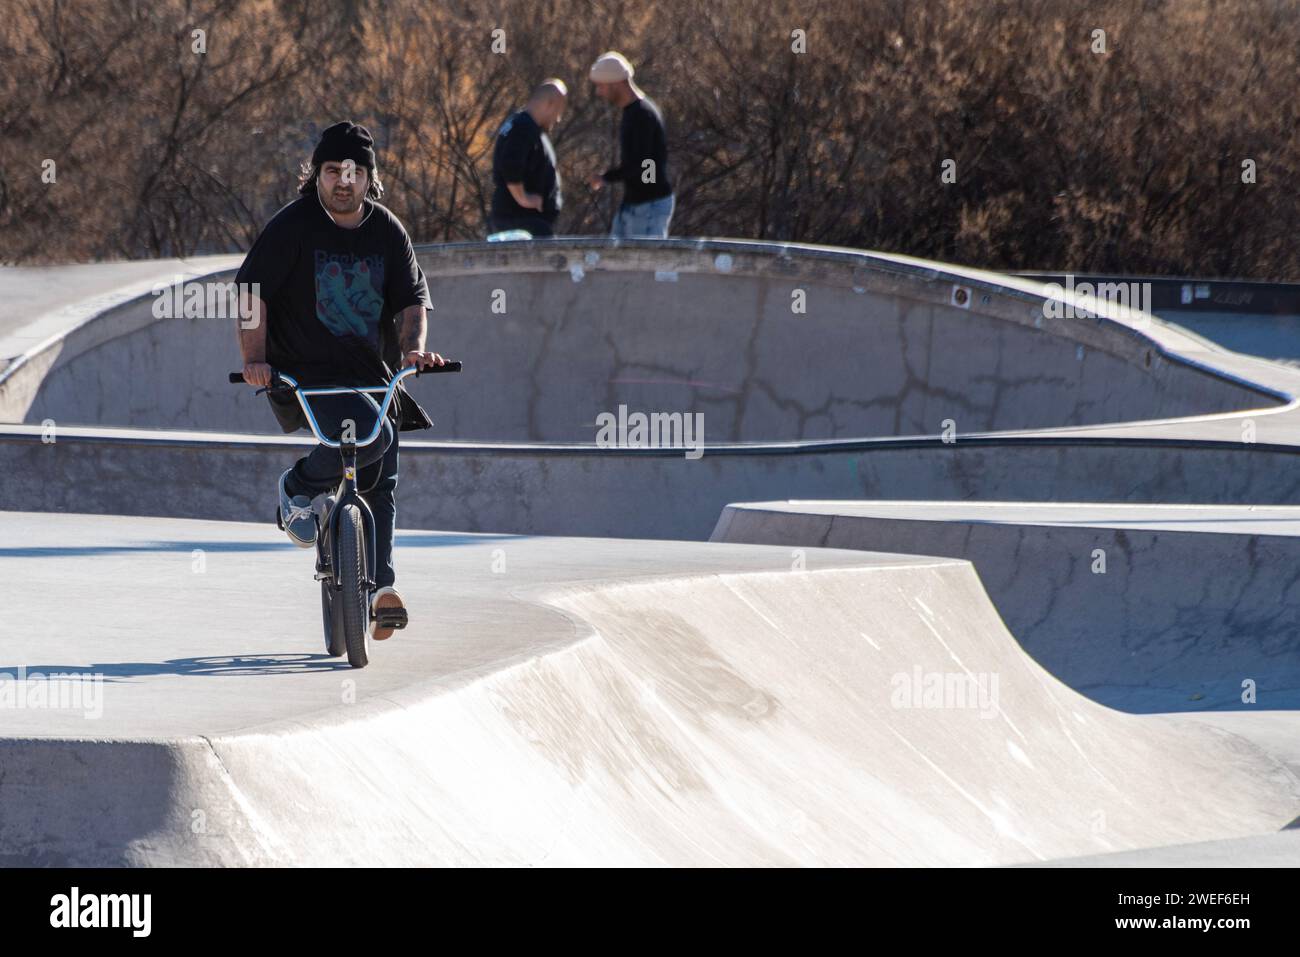 Sunny BMX ride: Boy on bike explores the skate park under the bright rays of a sunlit day. Stock Photo